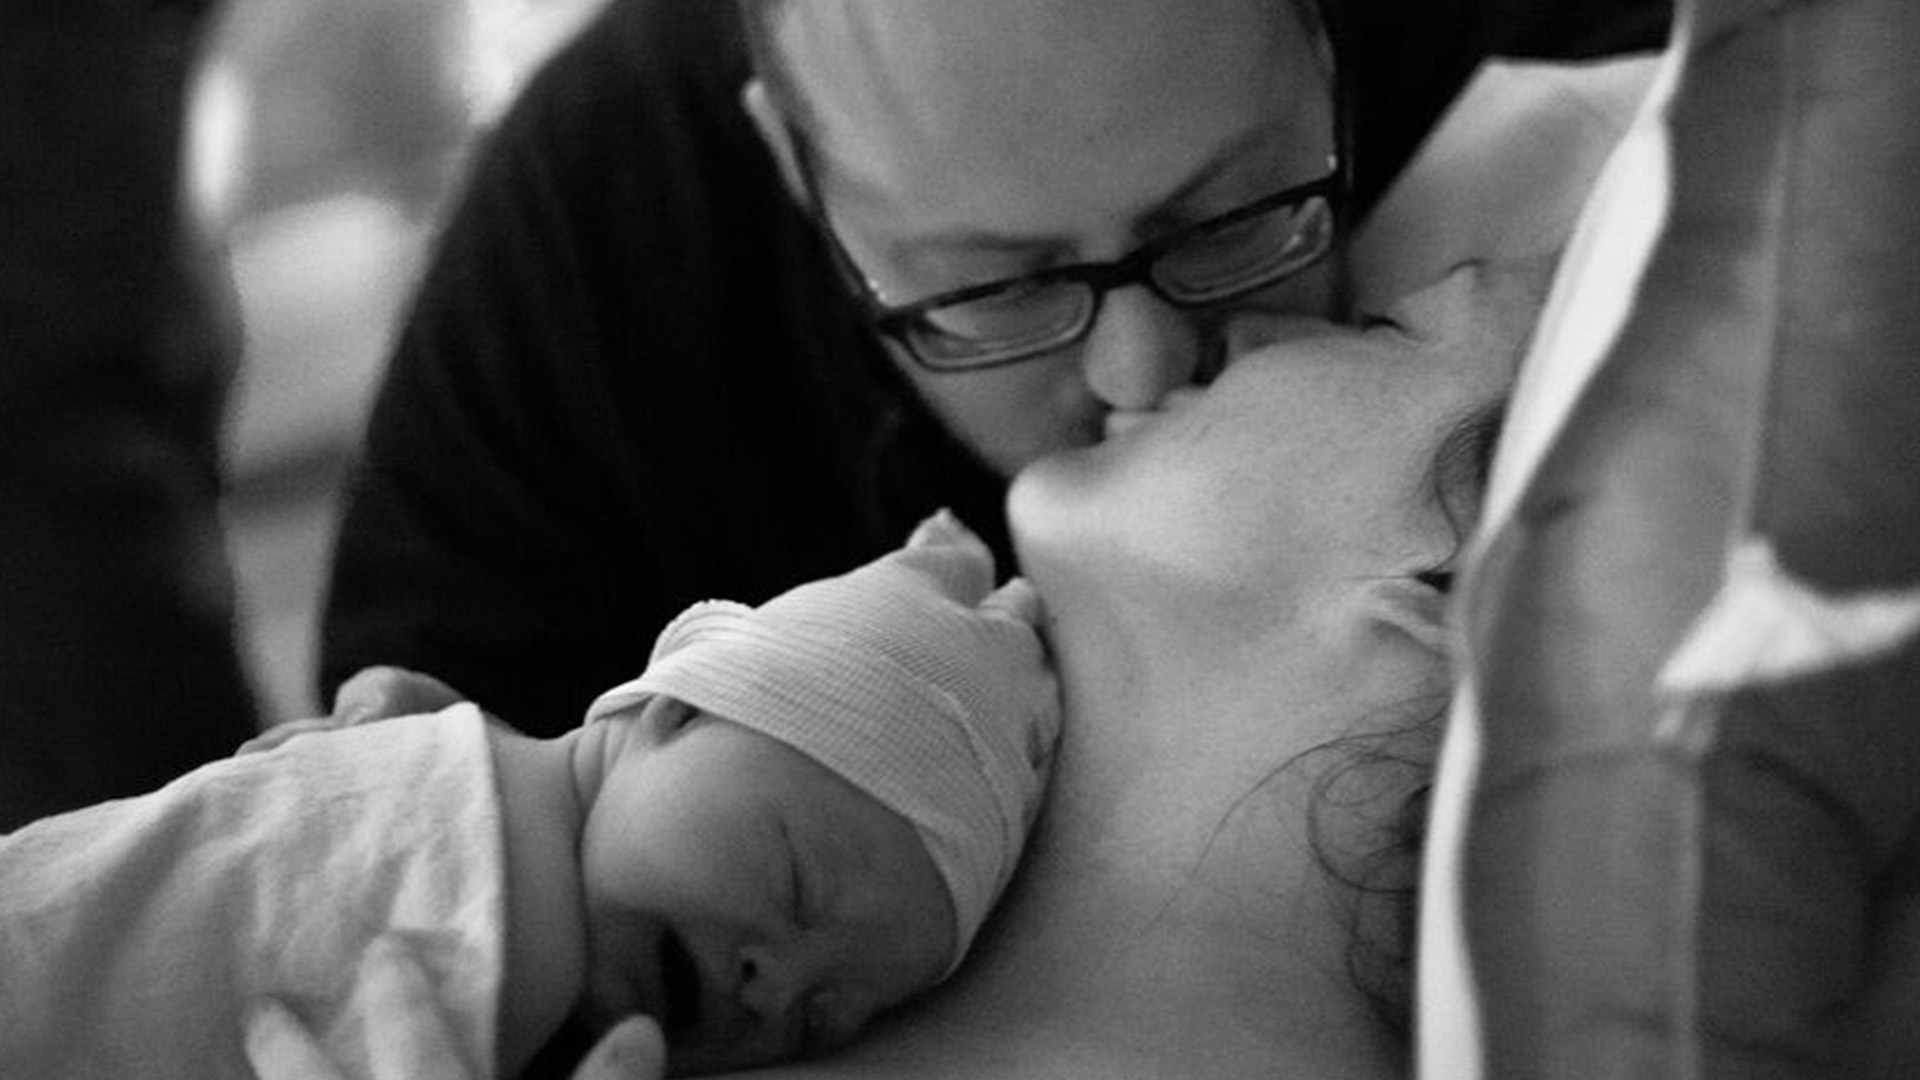 Man kissing his partner after she gave birth while holding a newborn